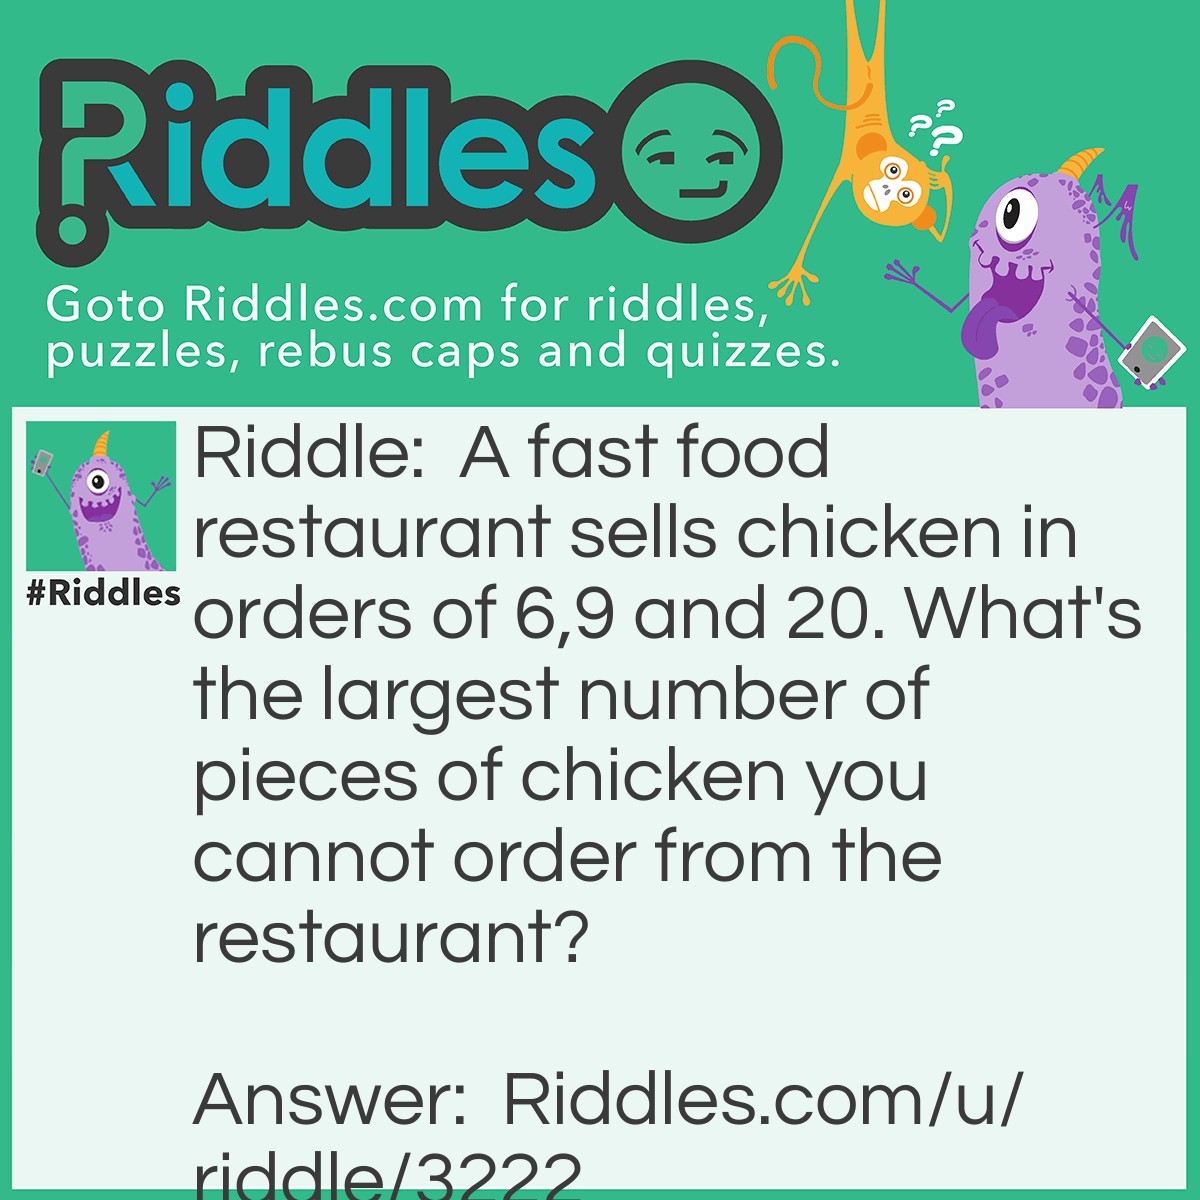 Riddle: A fast food restaurant sells chicken in orders of 6,9 and 20. What's the largest number of pieces of chicken you cannot order from the restaurant? Answer: 43 is the last number that doesn't fall into these categories.